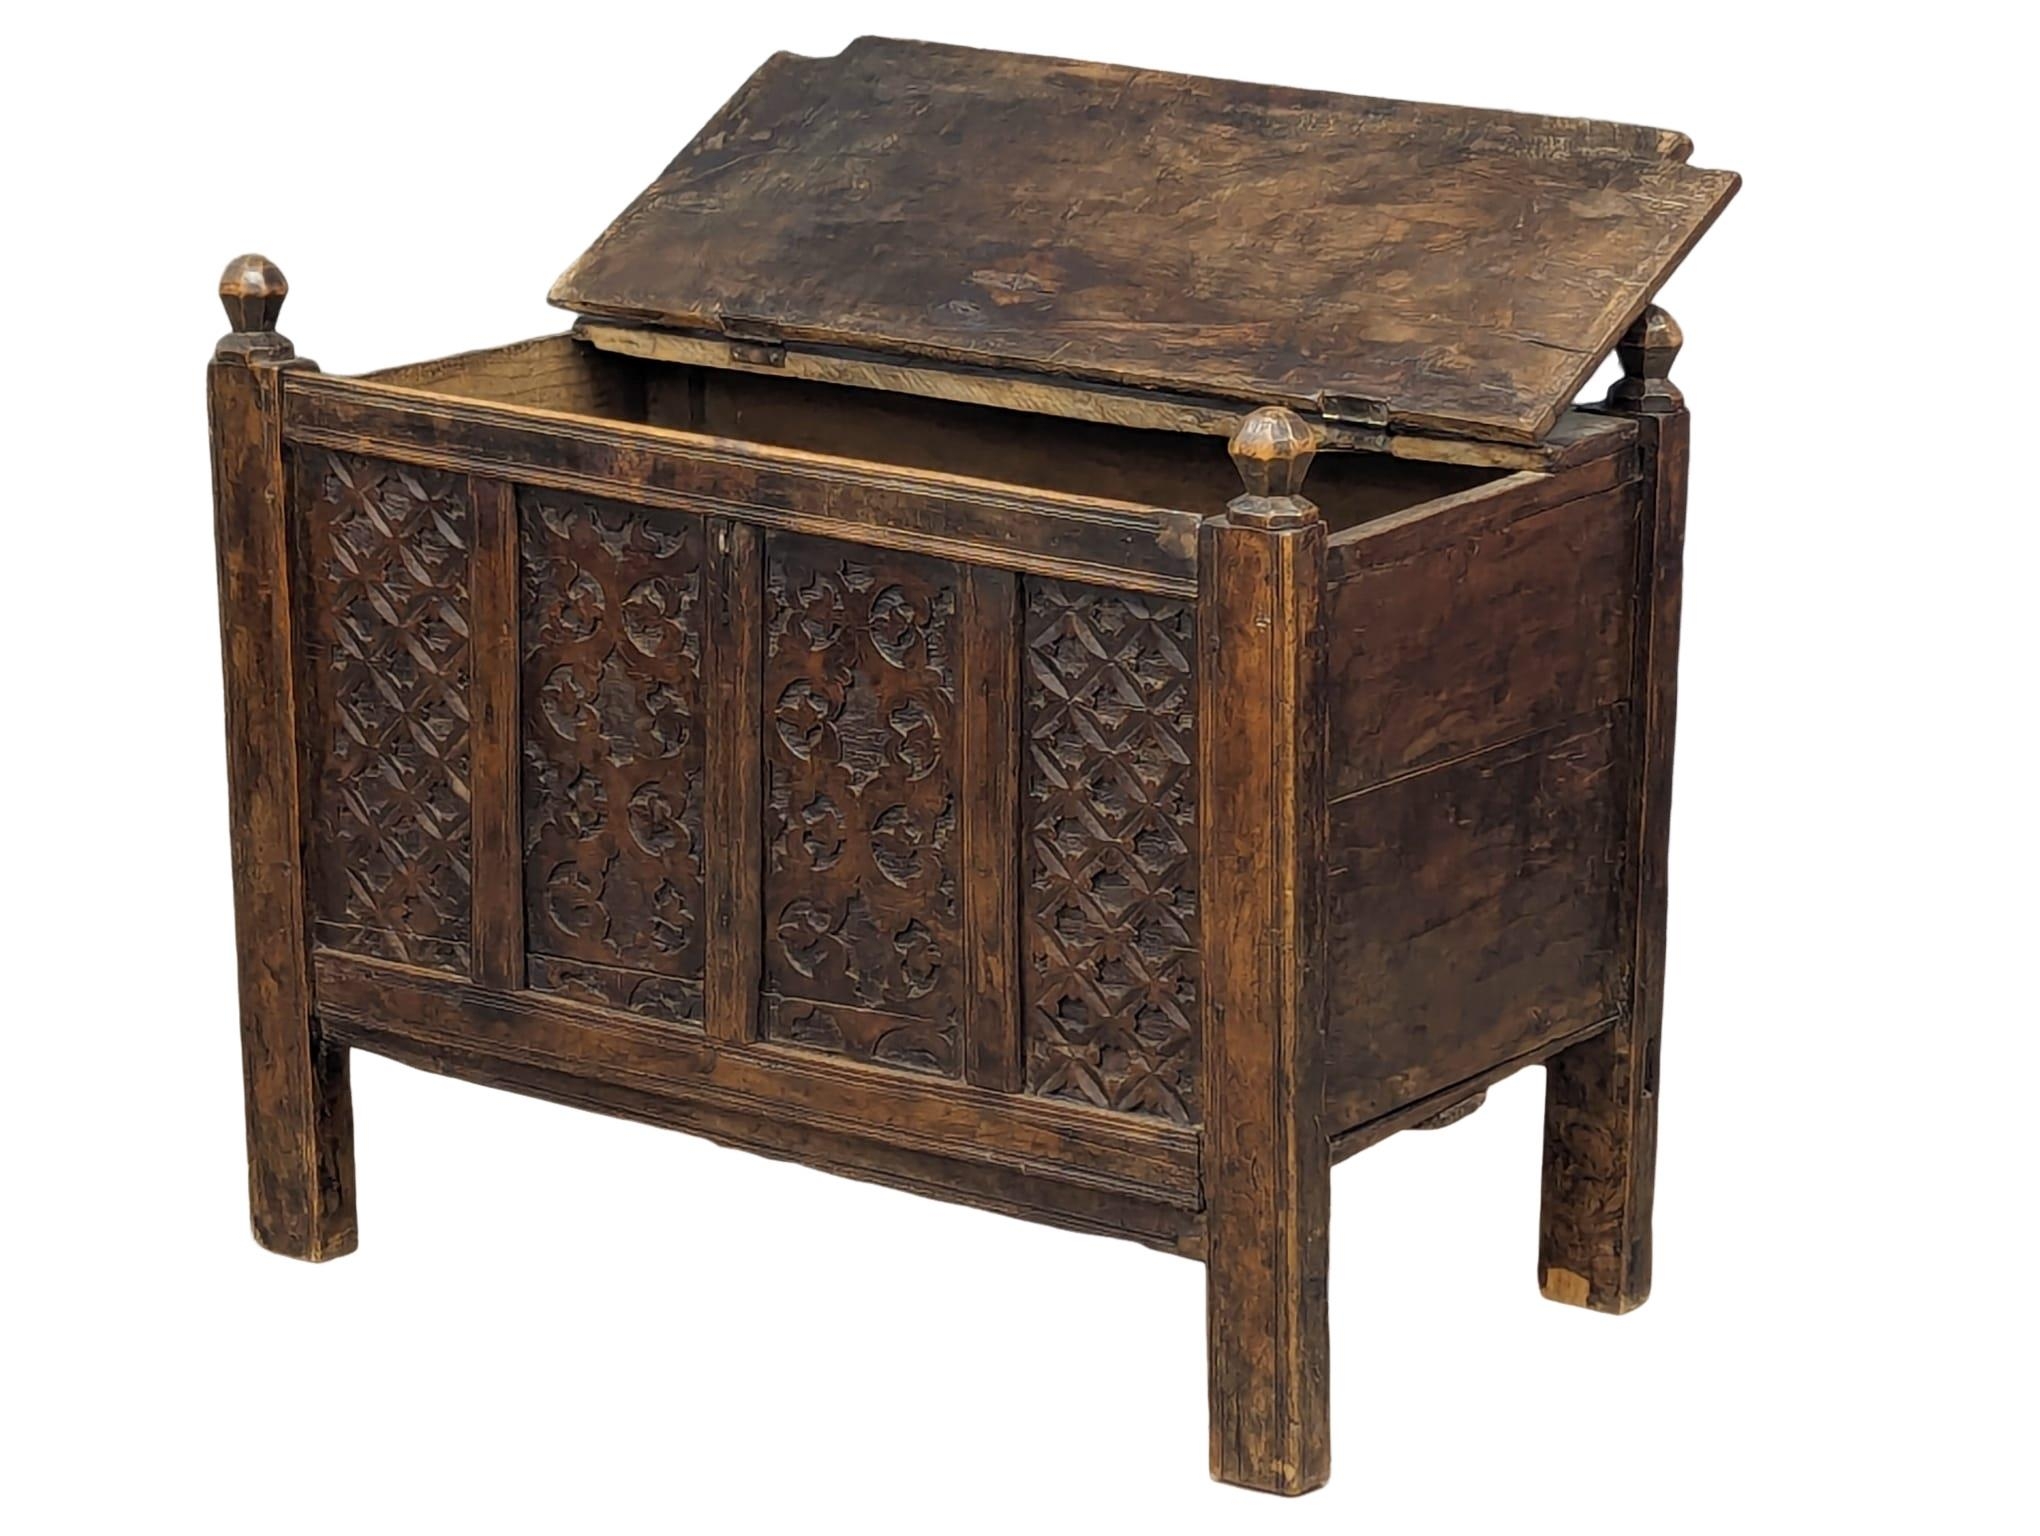 A late 18th Century Continental coffer, 90cm x 52cm x 74cm - Image 8 of 8